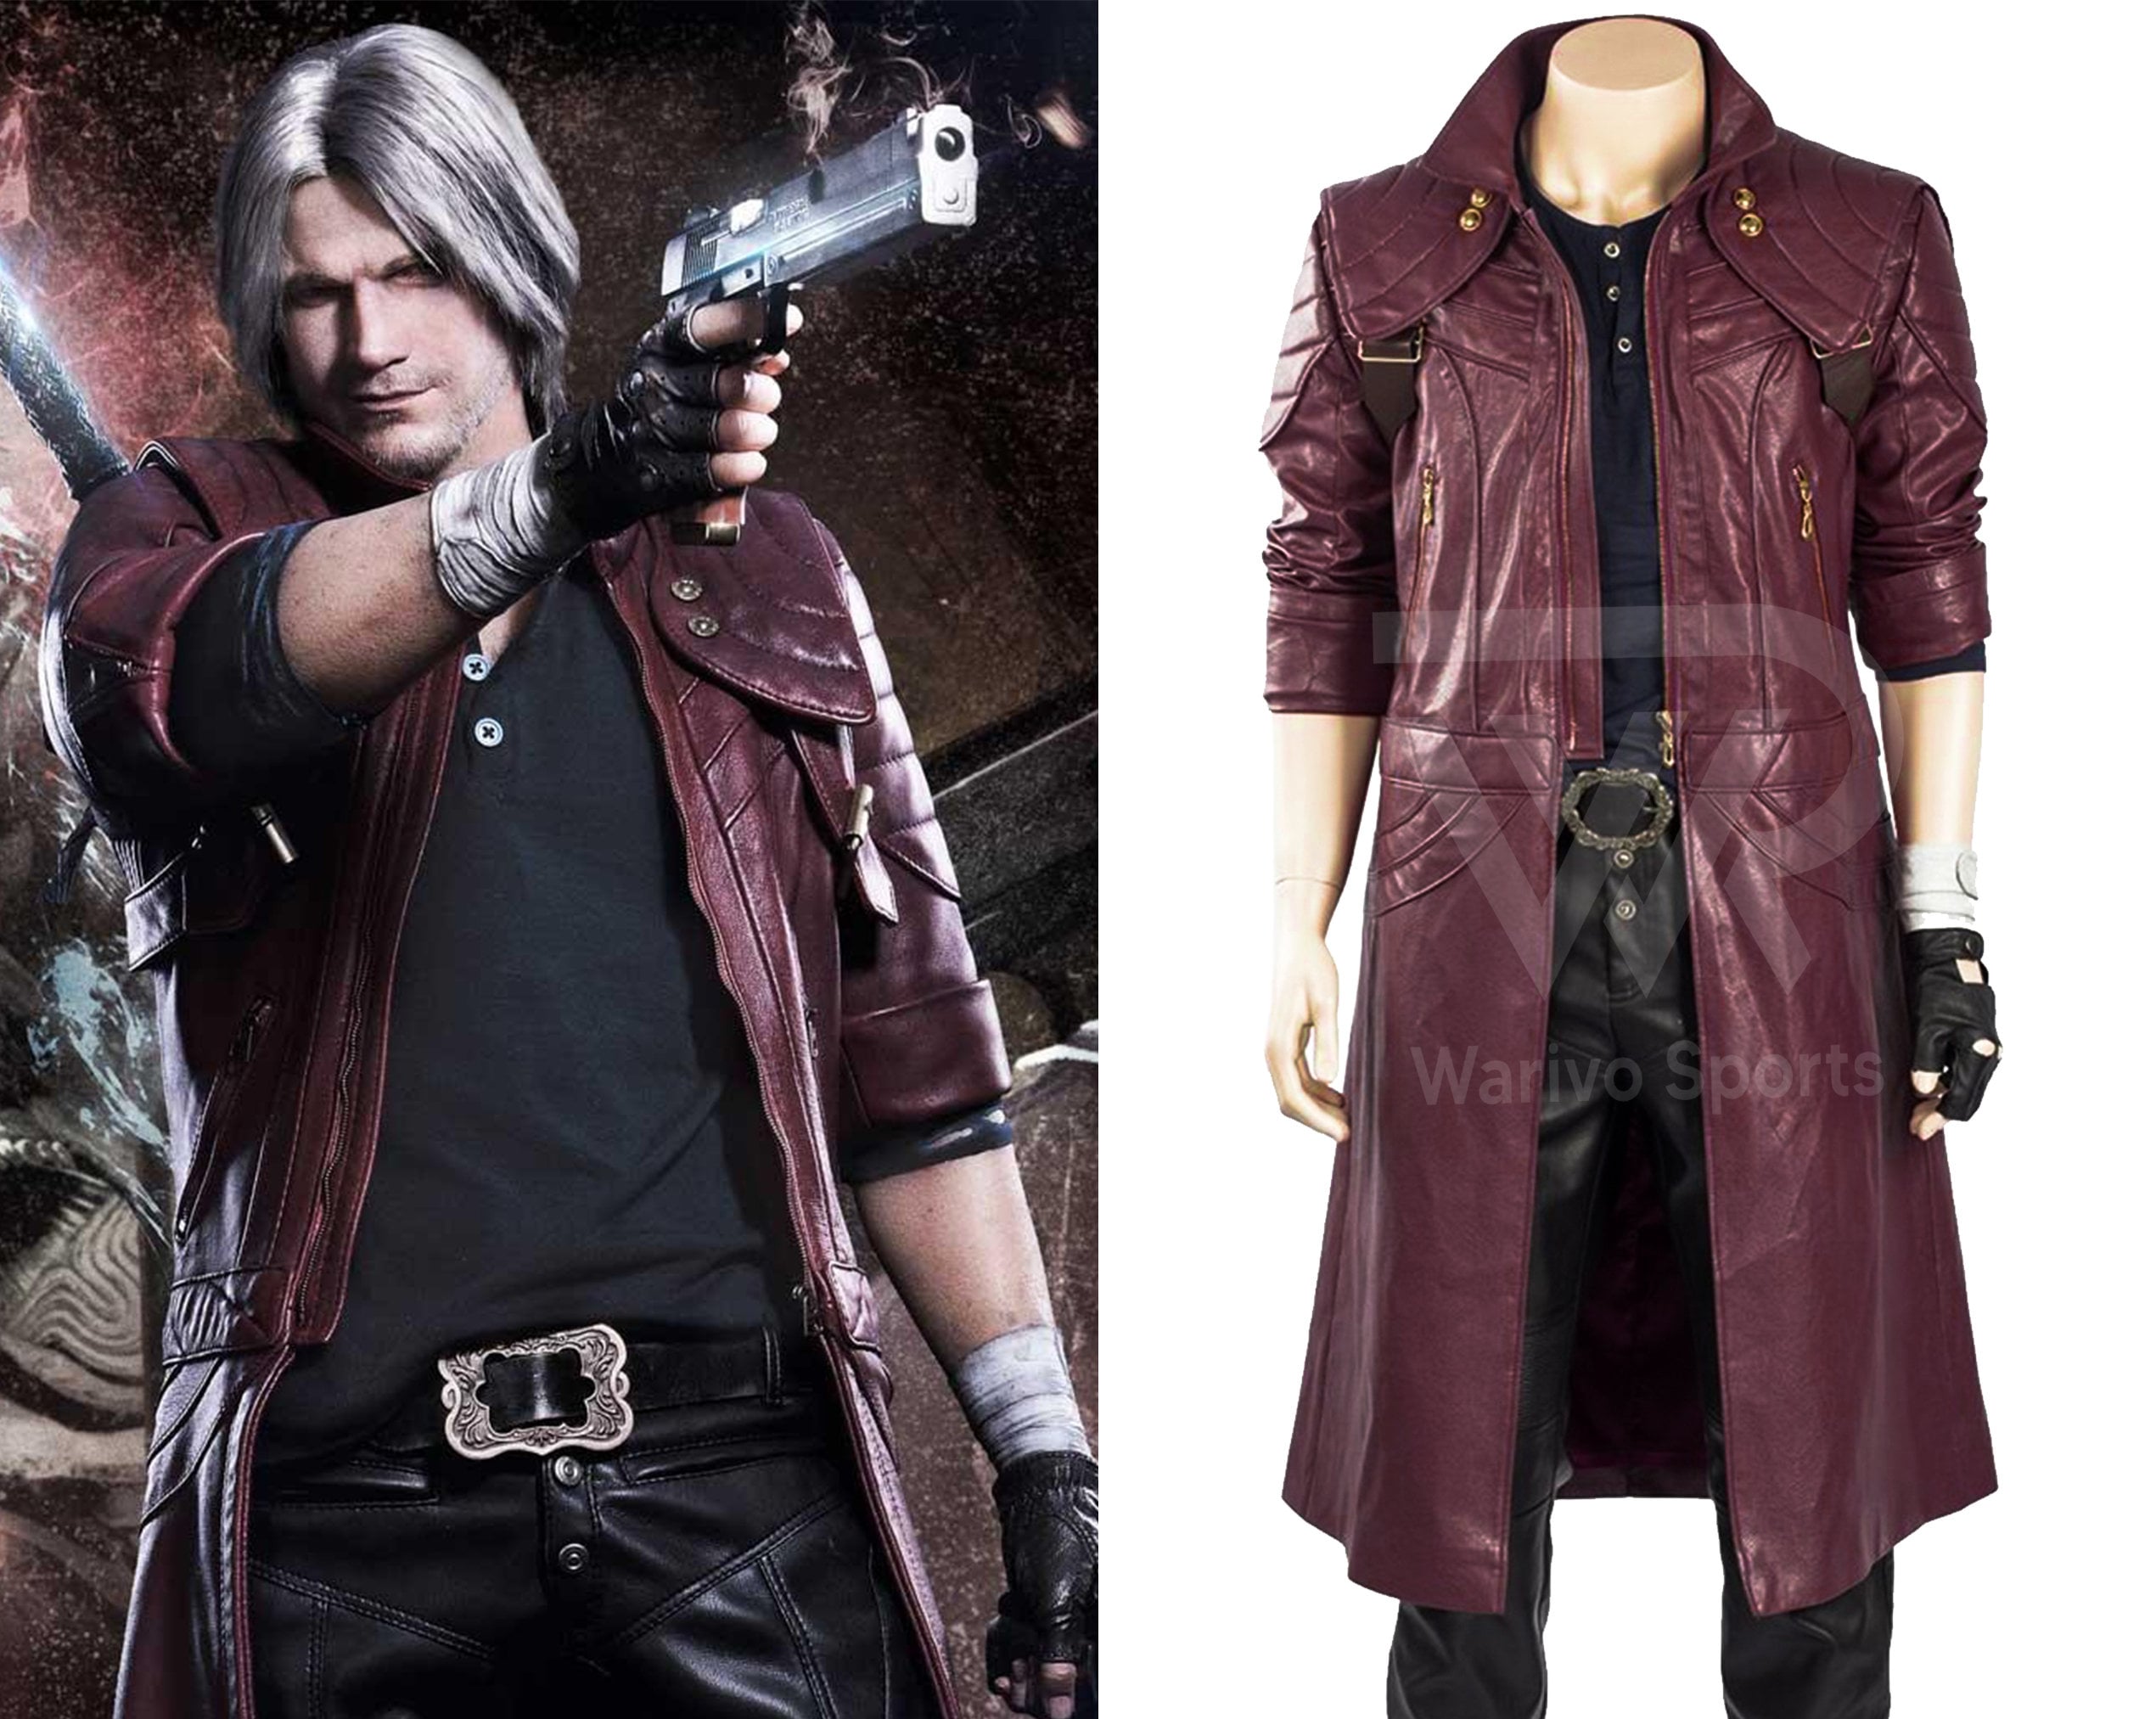 Buy Vergil coat replica Devil May Cry 3 - Free Test Coat - Free Shipping